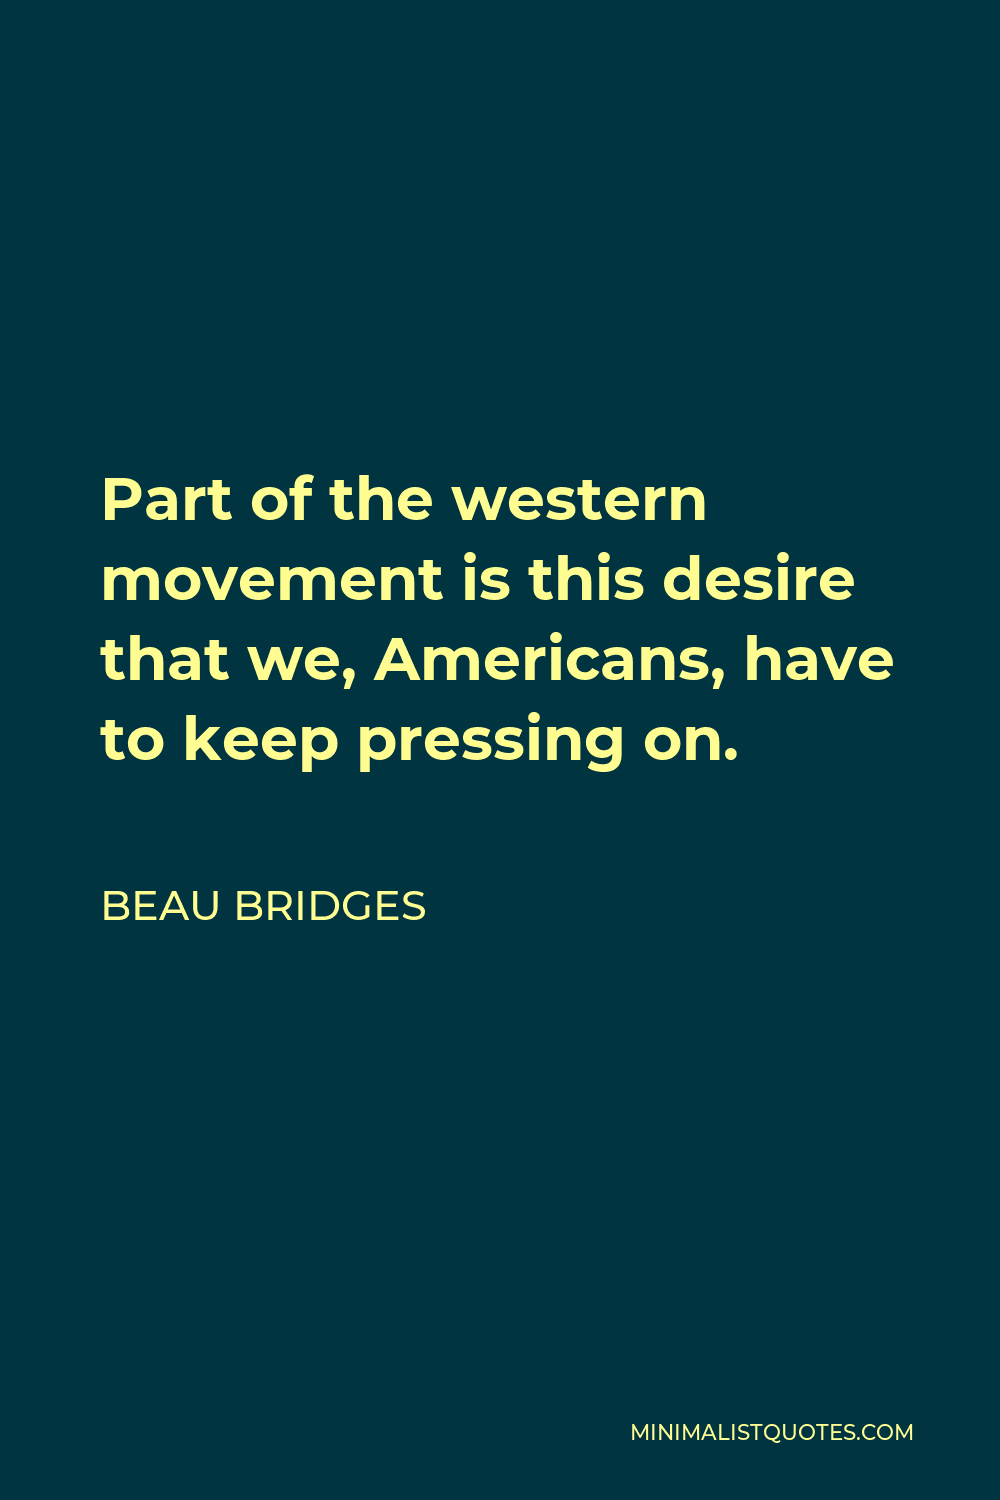 Beau Bridges Quote - Part of the western movement is this desire that we, Americans, have to keep pressing on.